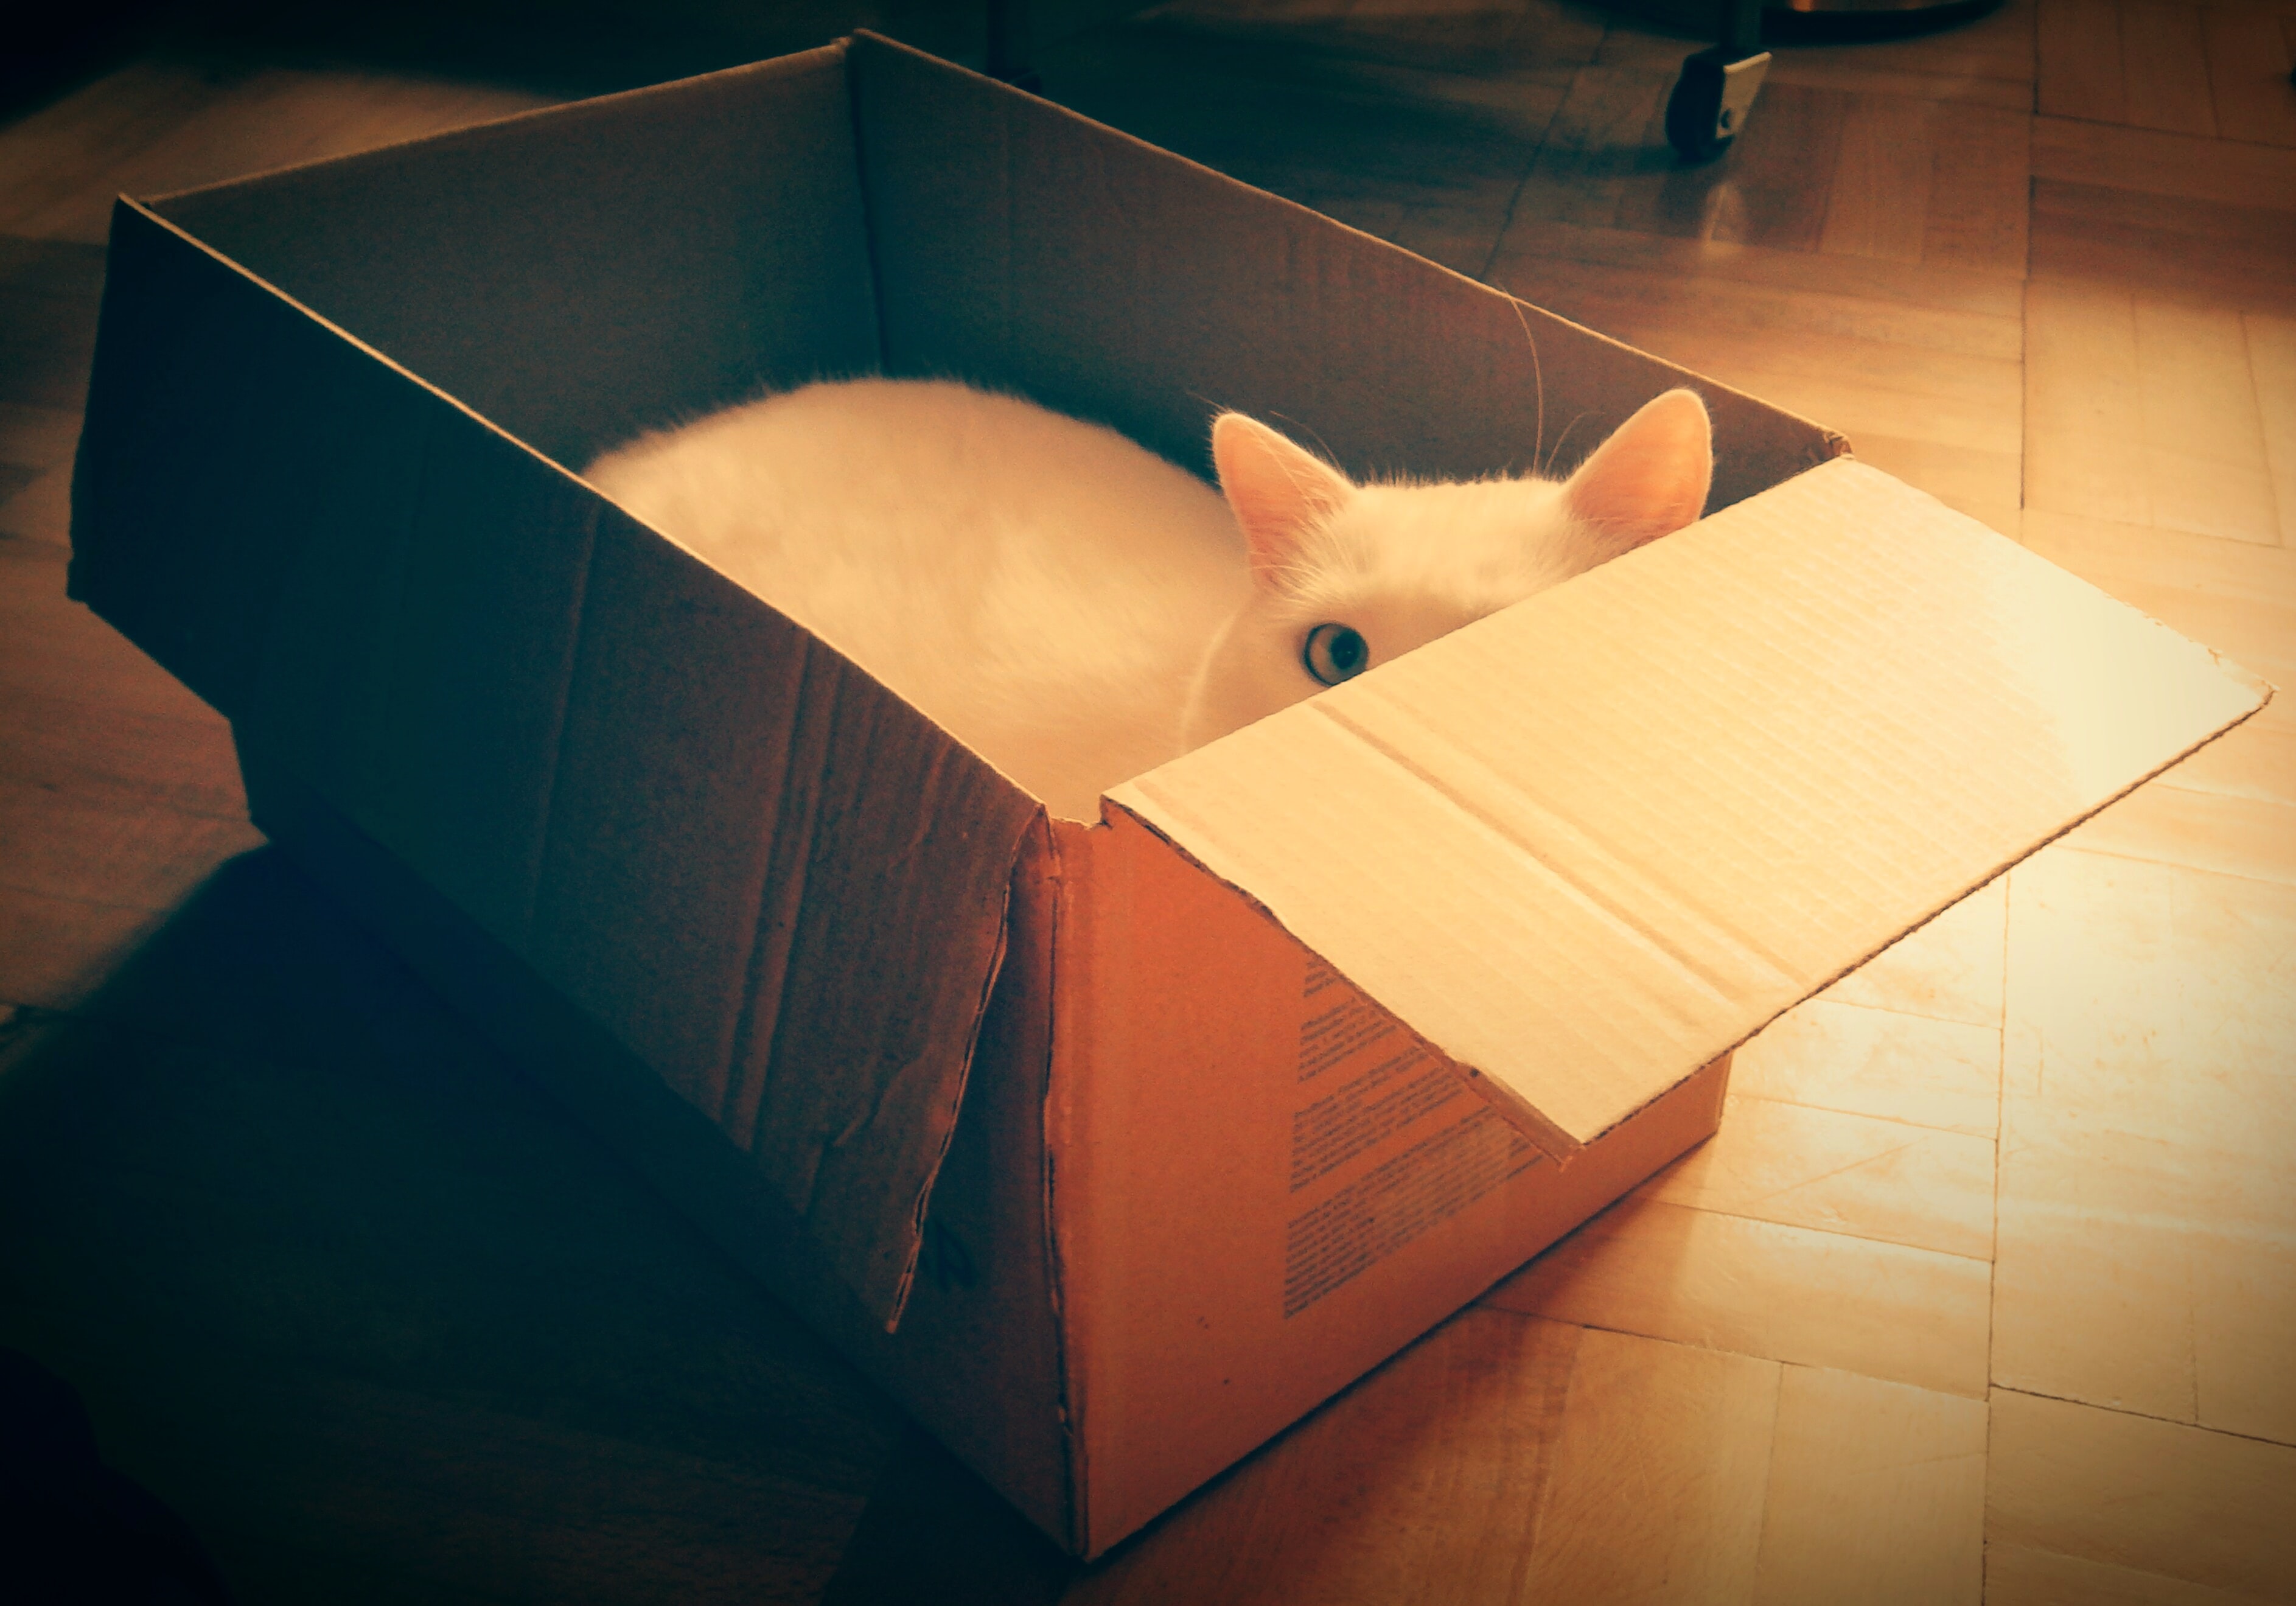 white cat in a box with one eye covered by the box